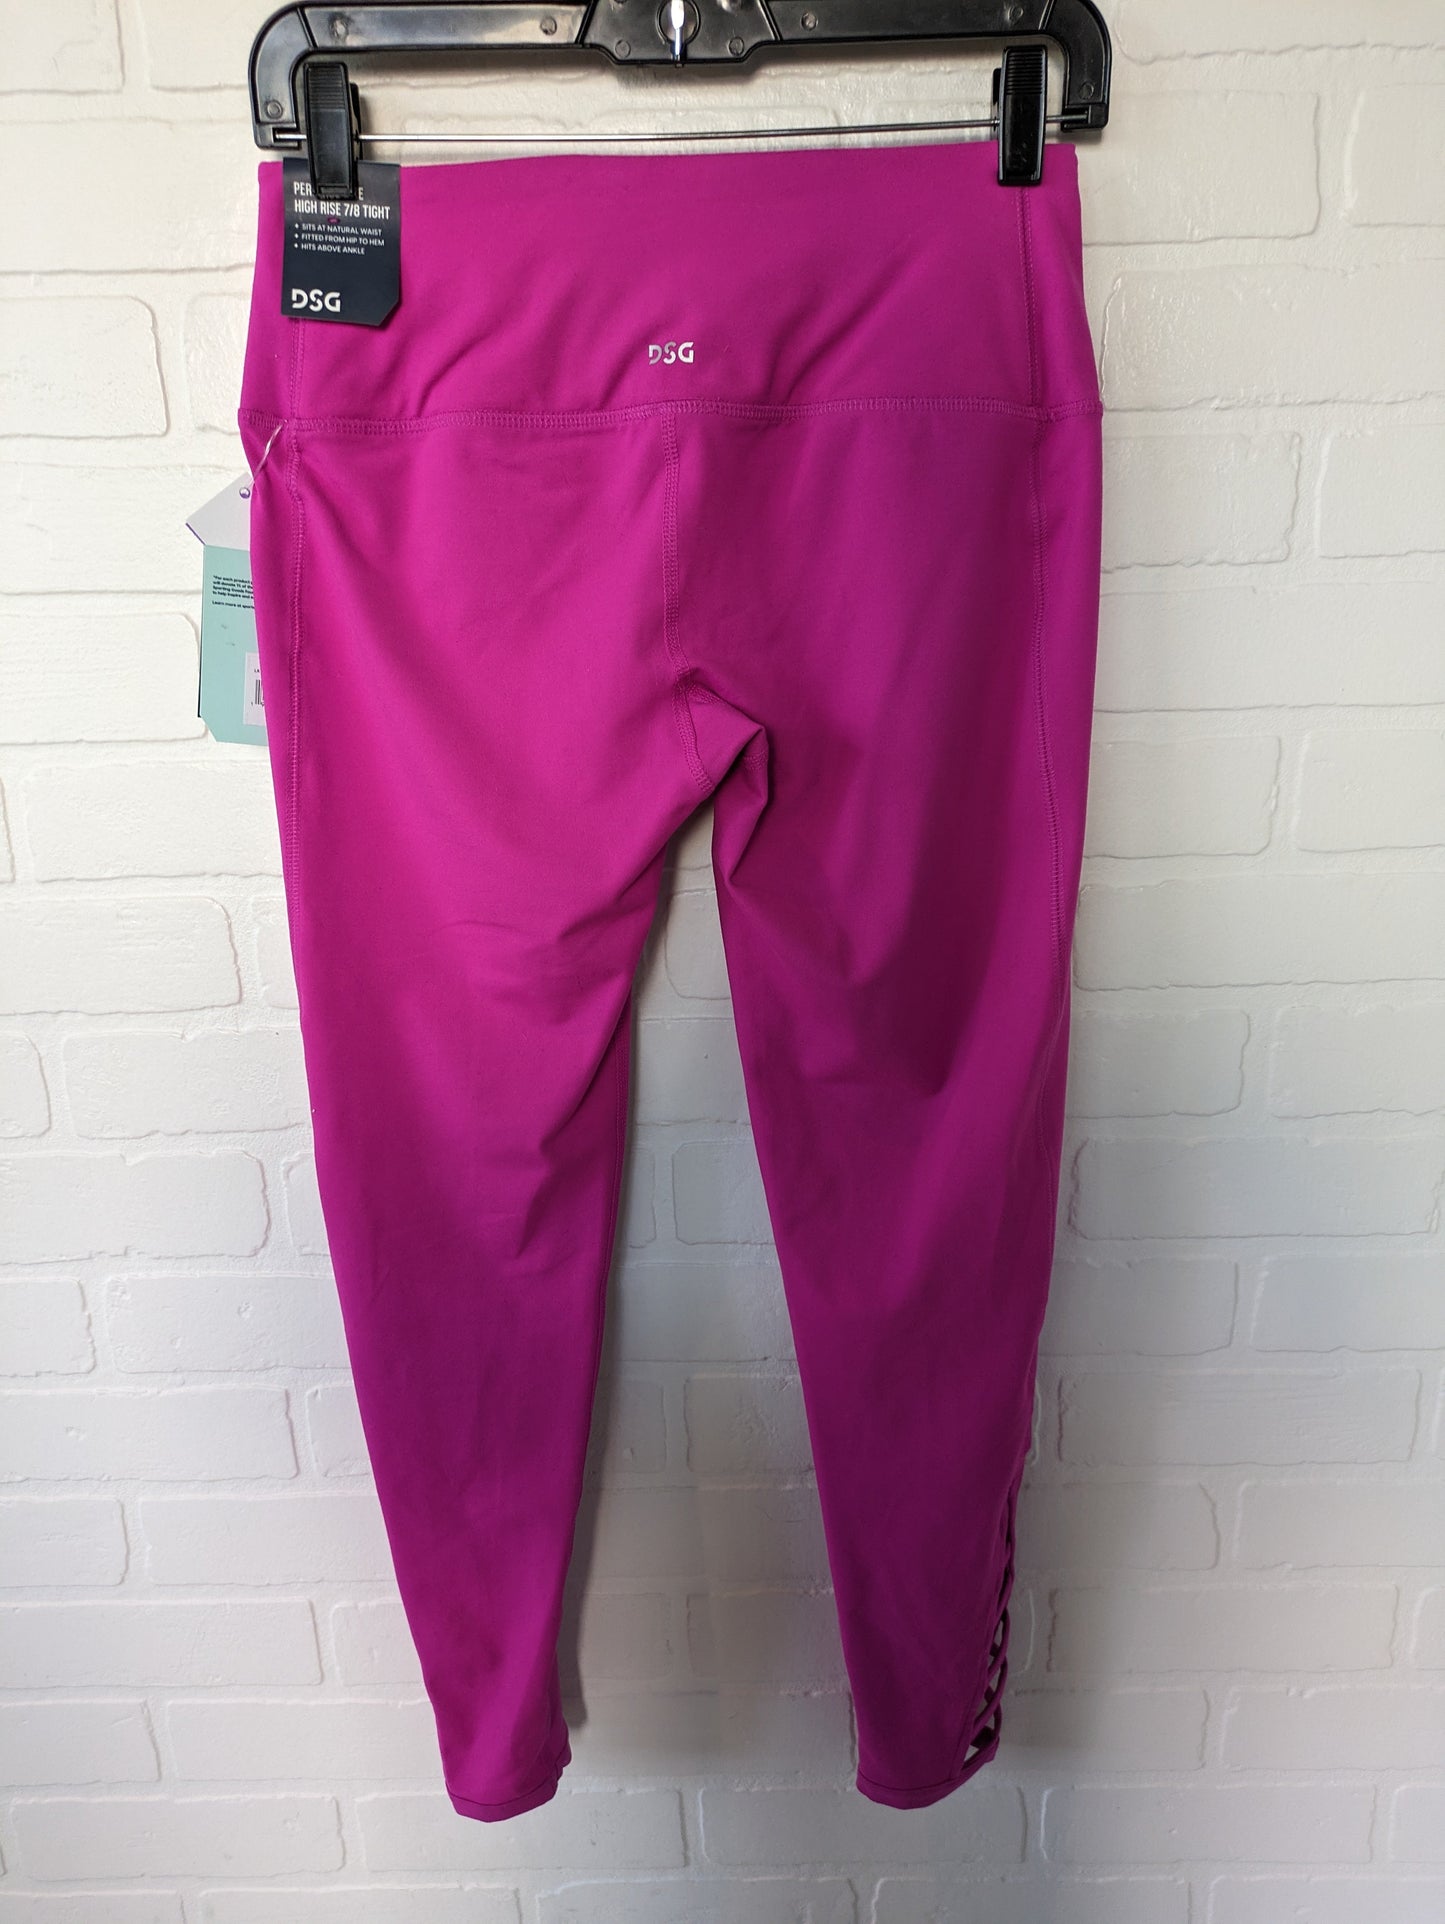 Pink Athletic Leggings Dsg Outerwear, Size 4